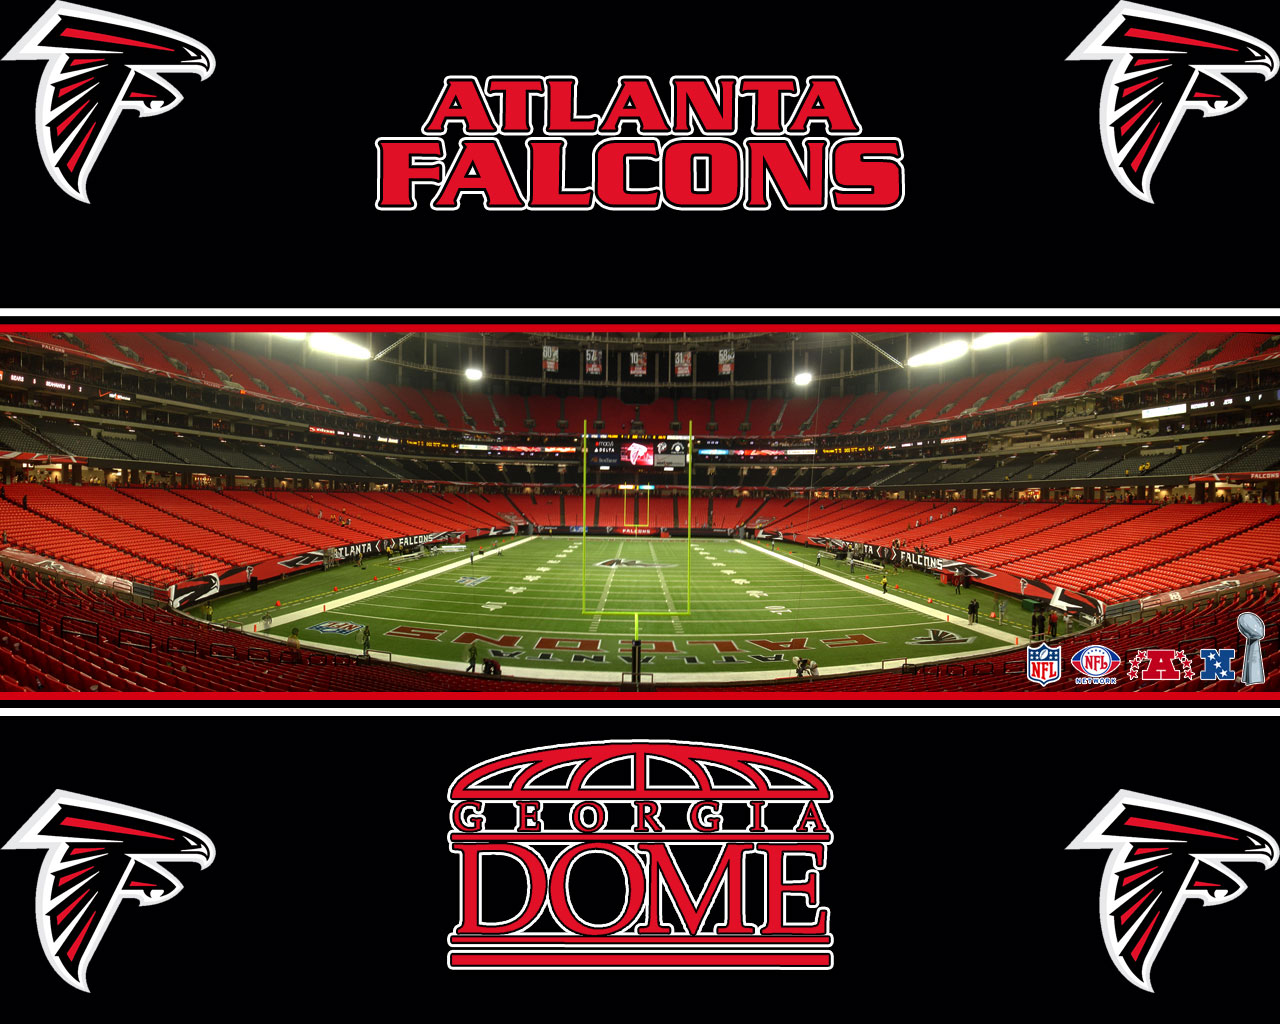 The Atlanta Falcons Single Home Game Tickets Went On Sale Wednesday